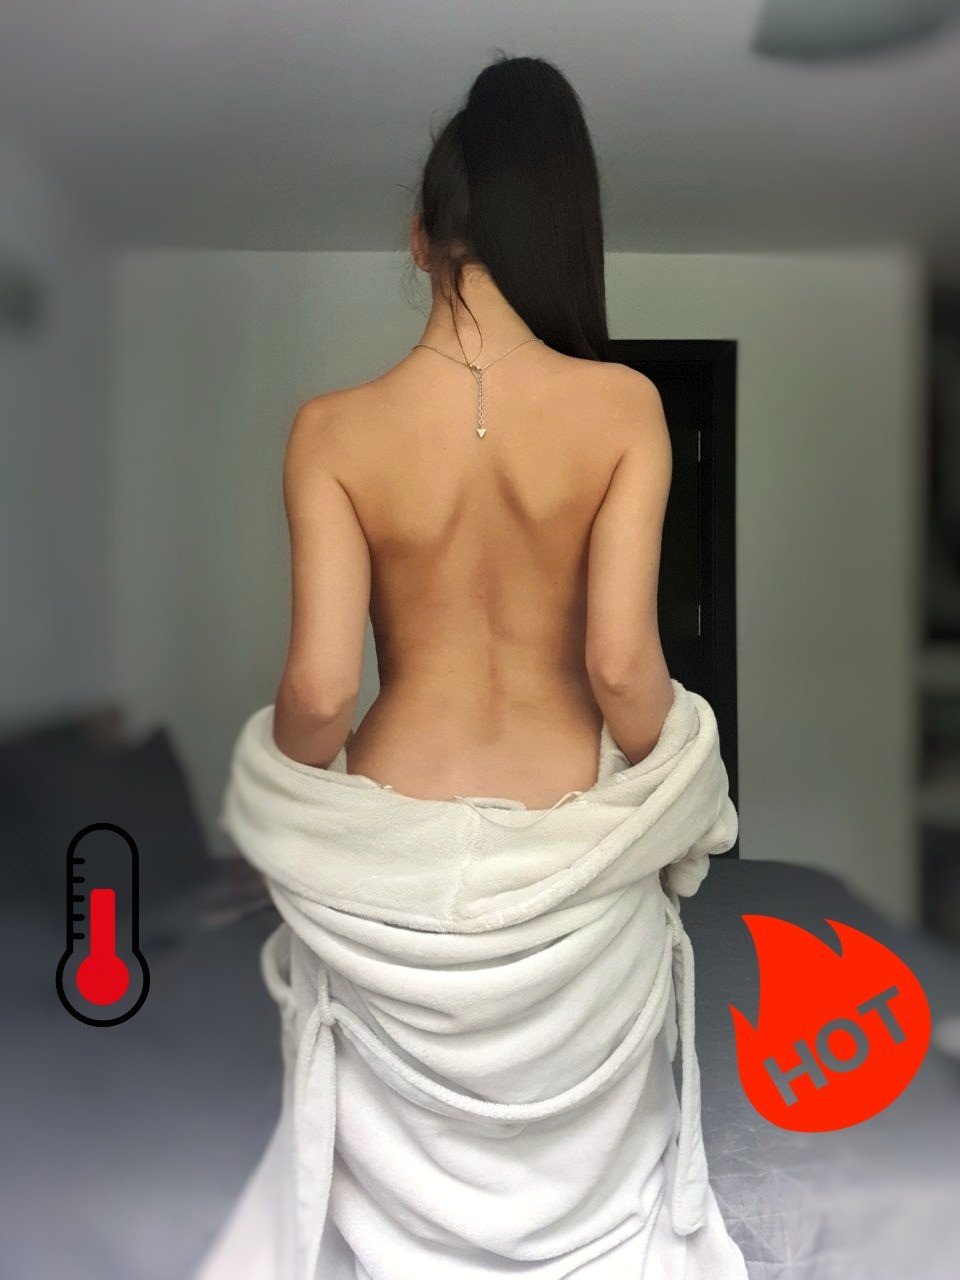 Watch the Photo by SereneSophie with the username @SereneSophie, who is a star user, posted on August 14, 2019. The post is about the topic Ass. and the text says '#Humpday #Booty #SexyAF #Bootylicious

It's gettin'🔥 hot in here...
Definitely will make me take off my🛀clothes💦...
How do you prefer... Hot or colder❓

💯Live🔛bit.ly/SereneSophie🔝💋'